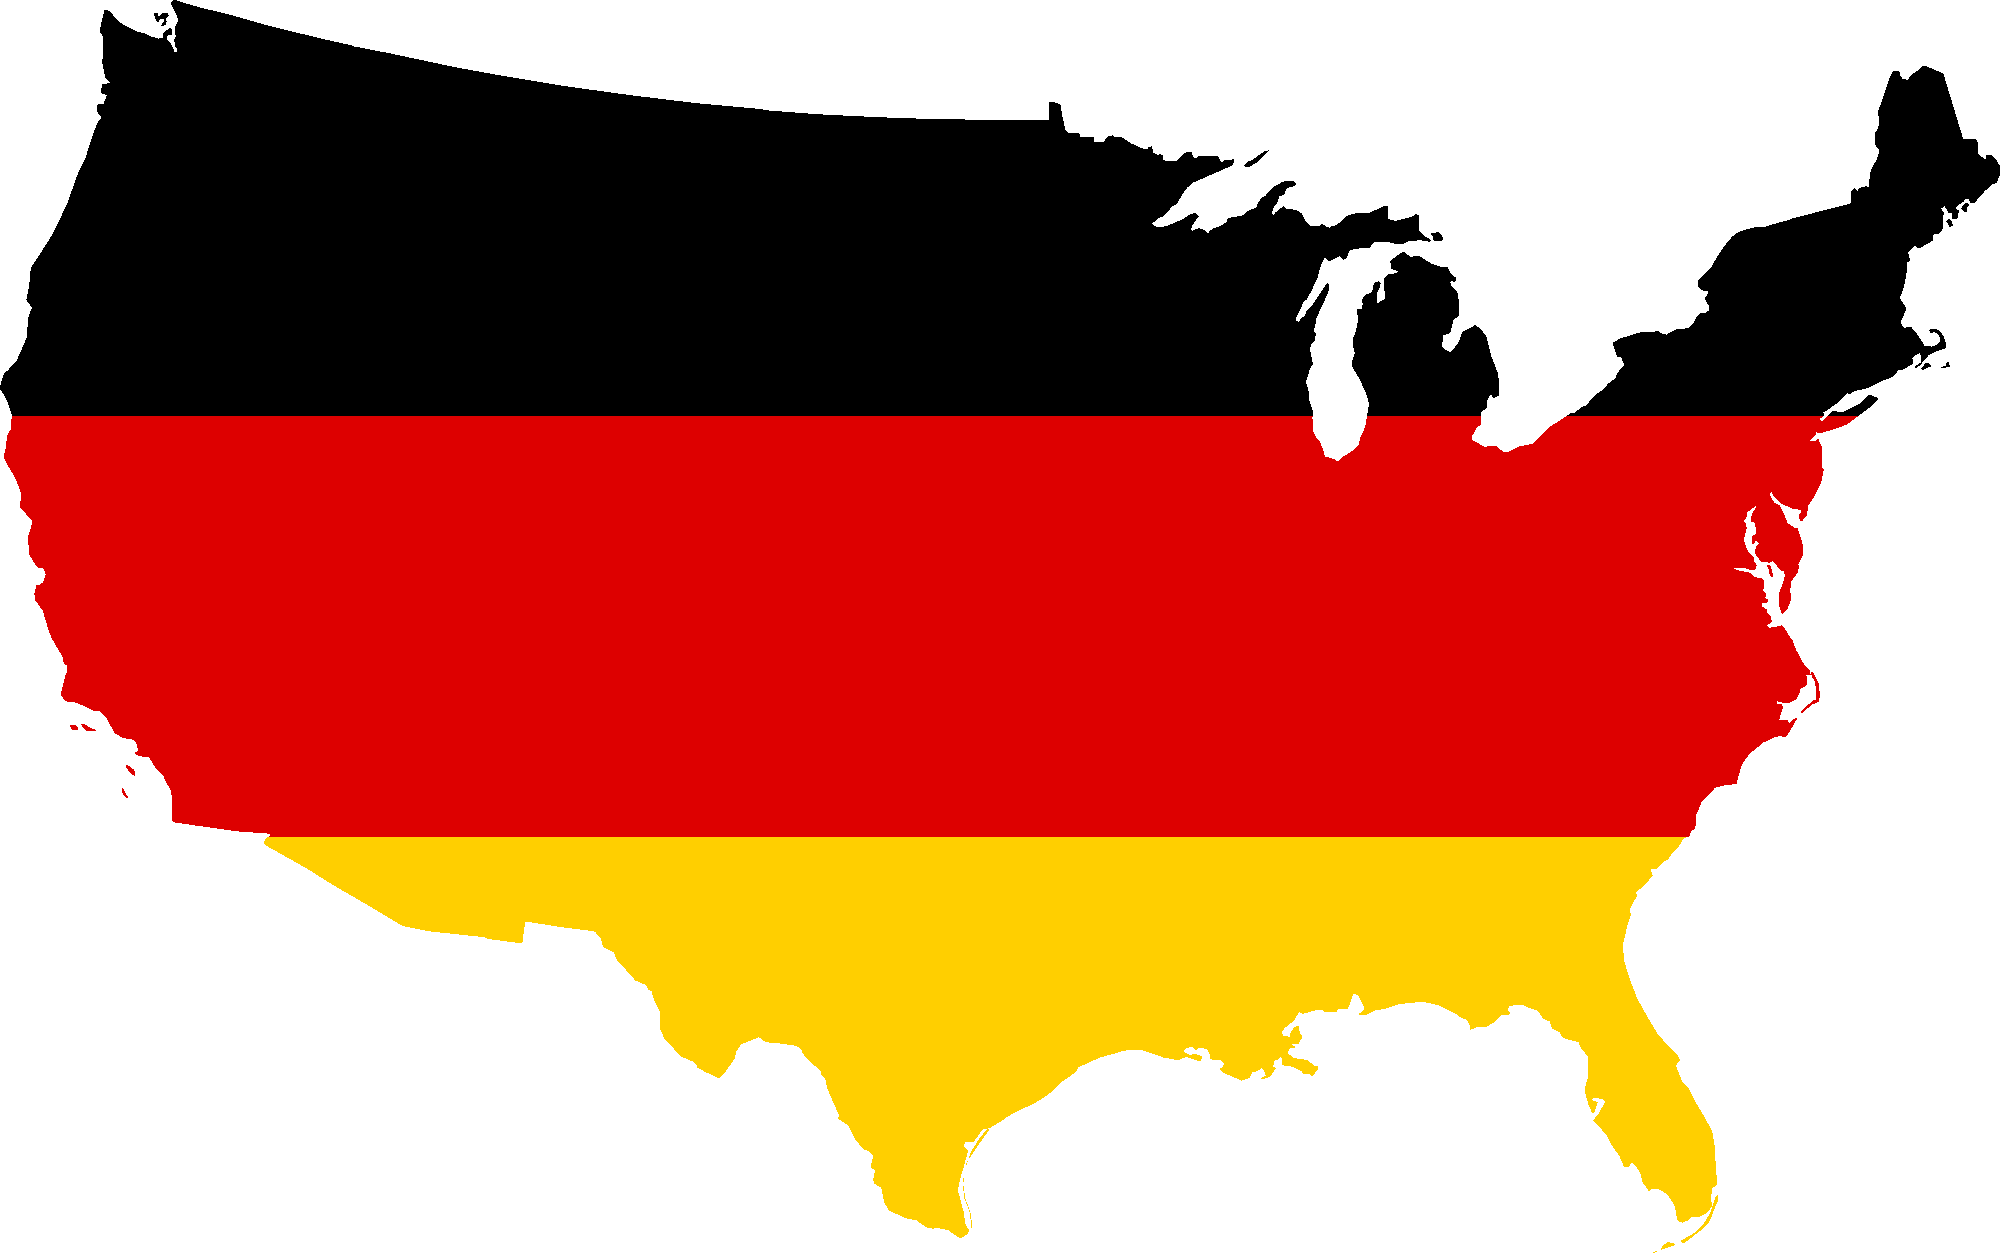 Map of Germany Image. Free & HD!